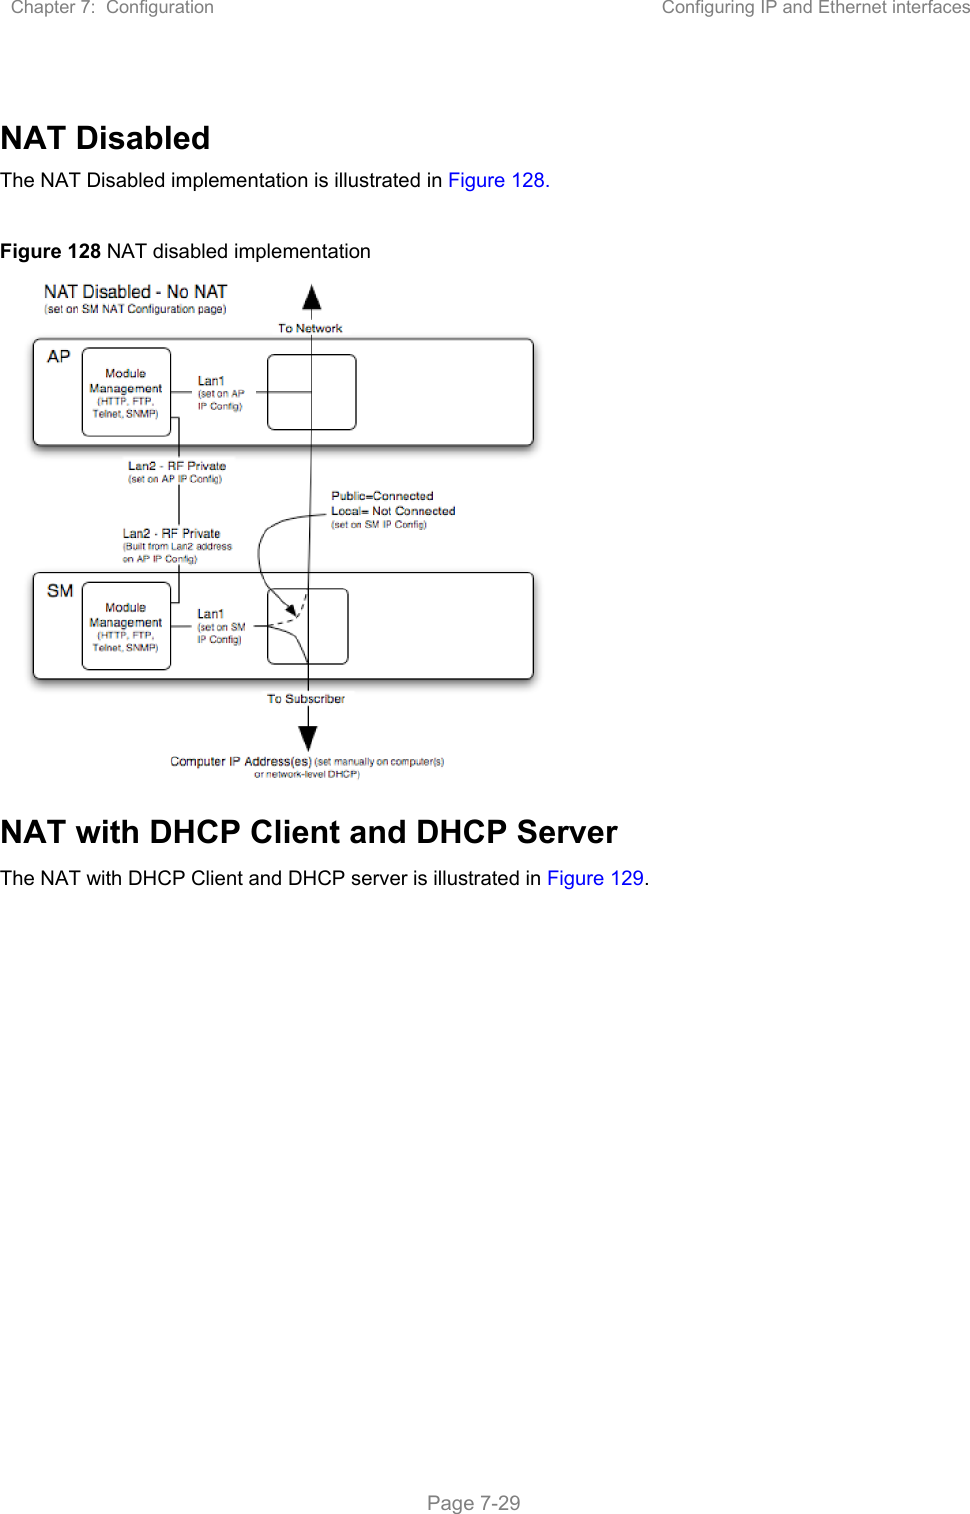 Chapter 7:  Configuration  Configuring IP and Ethernet interfaces   Page 7-29  NAT Disabled The NAT Disabled implementation is illustrated in Figure 128.  Figure 128 NAT disabled implementation  NAT with DHCP Client and DHCP Server The NAT with DHCP Client and DHCP server is illustrated in Figure 129. 